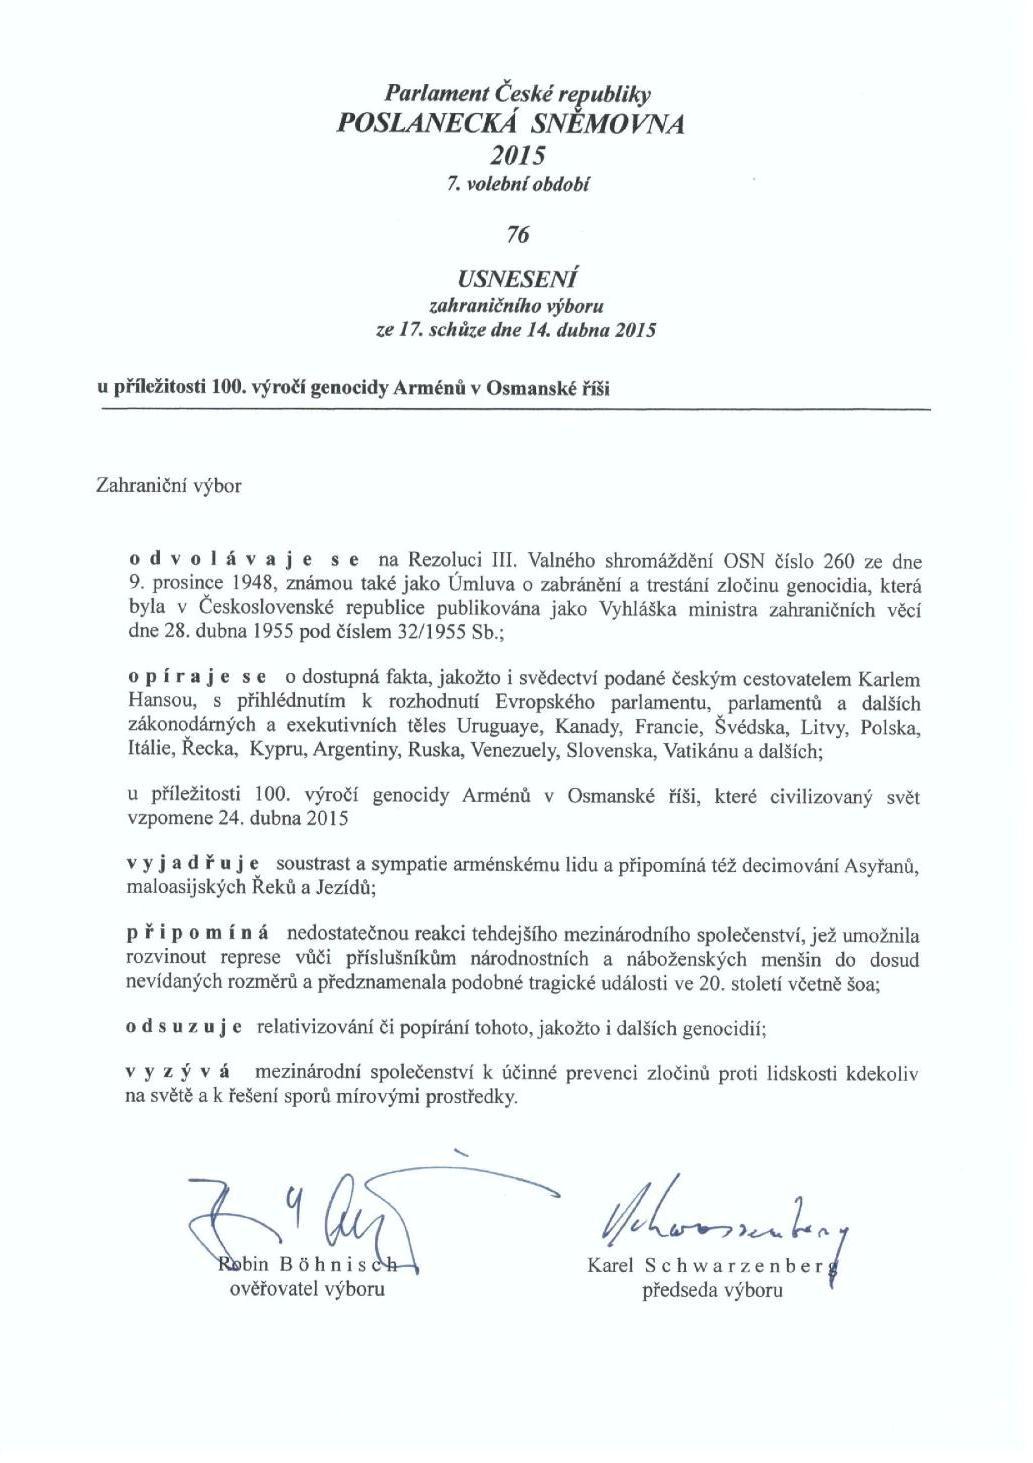 Committee on Foreign Affairs of the Chamber of Deputies of the Parliament of the Czech Republic passed a resolution on the occasion of the Armenian Genocide Centenary